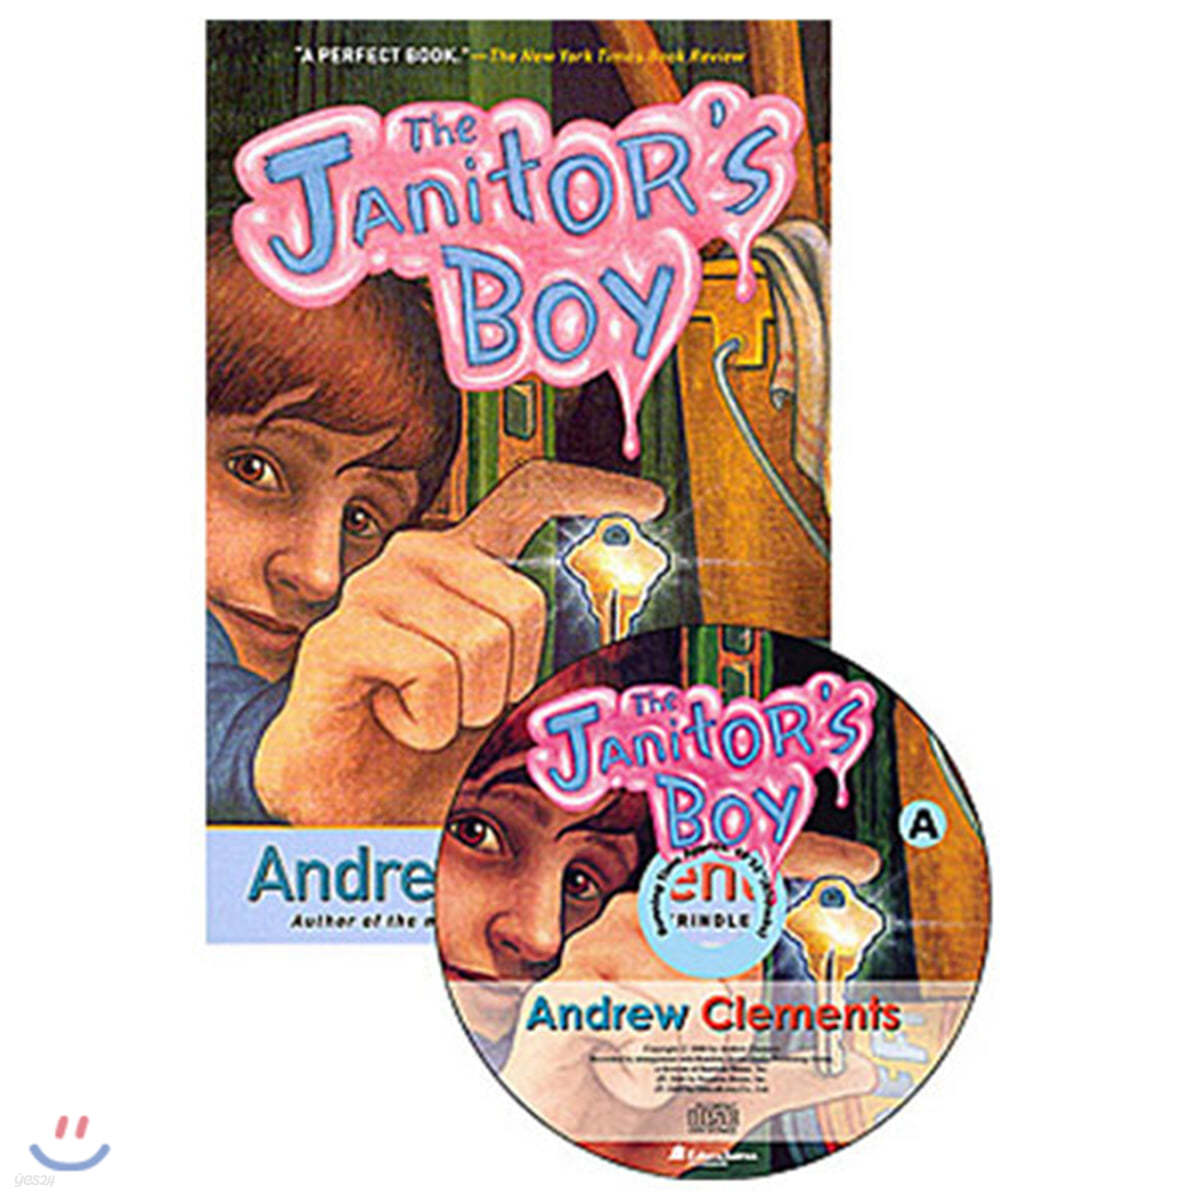 The Janitor's Boy (Book + MP3 CD)